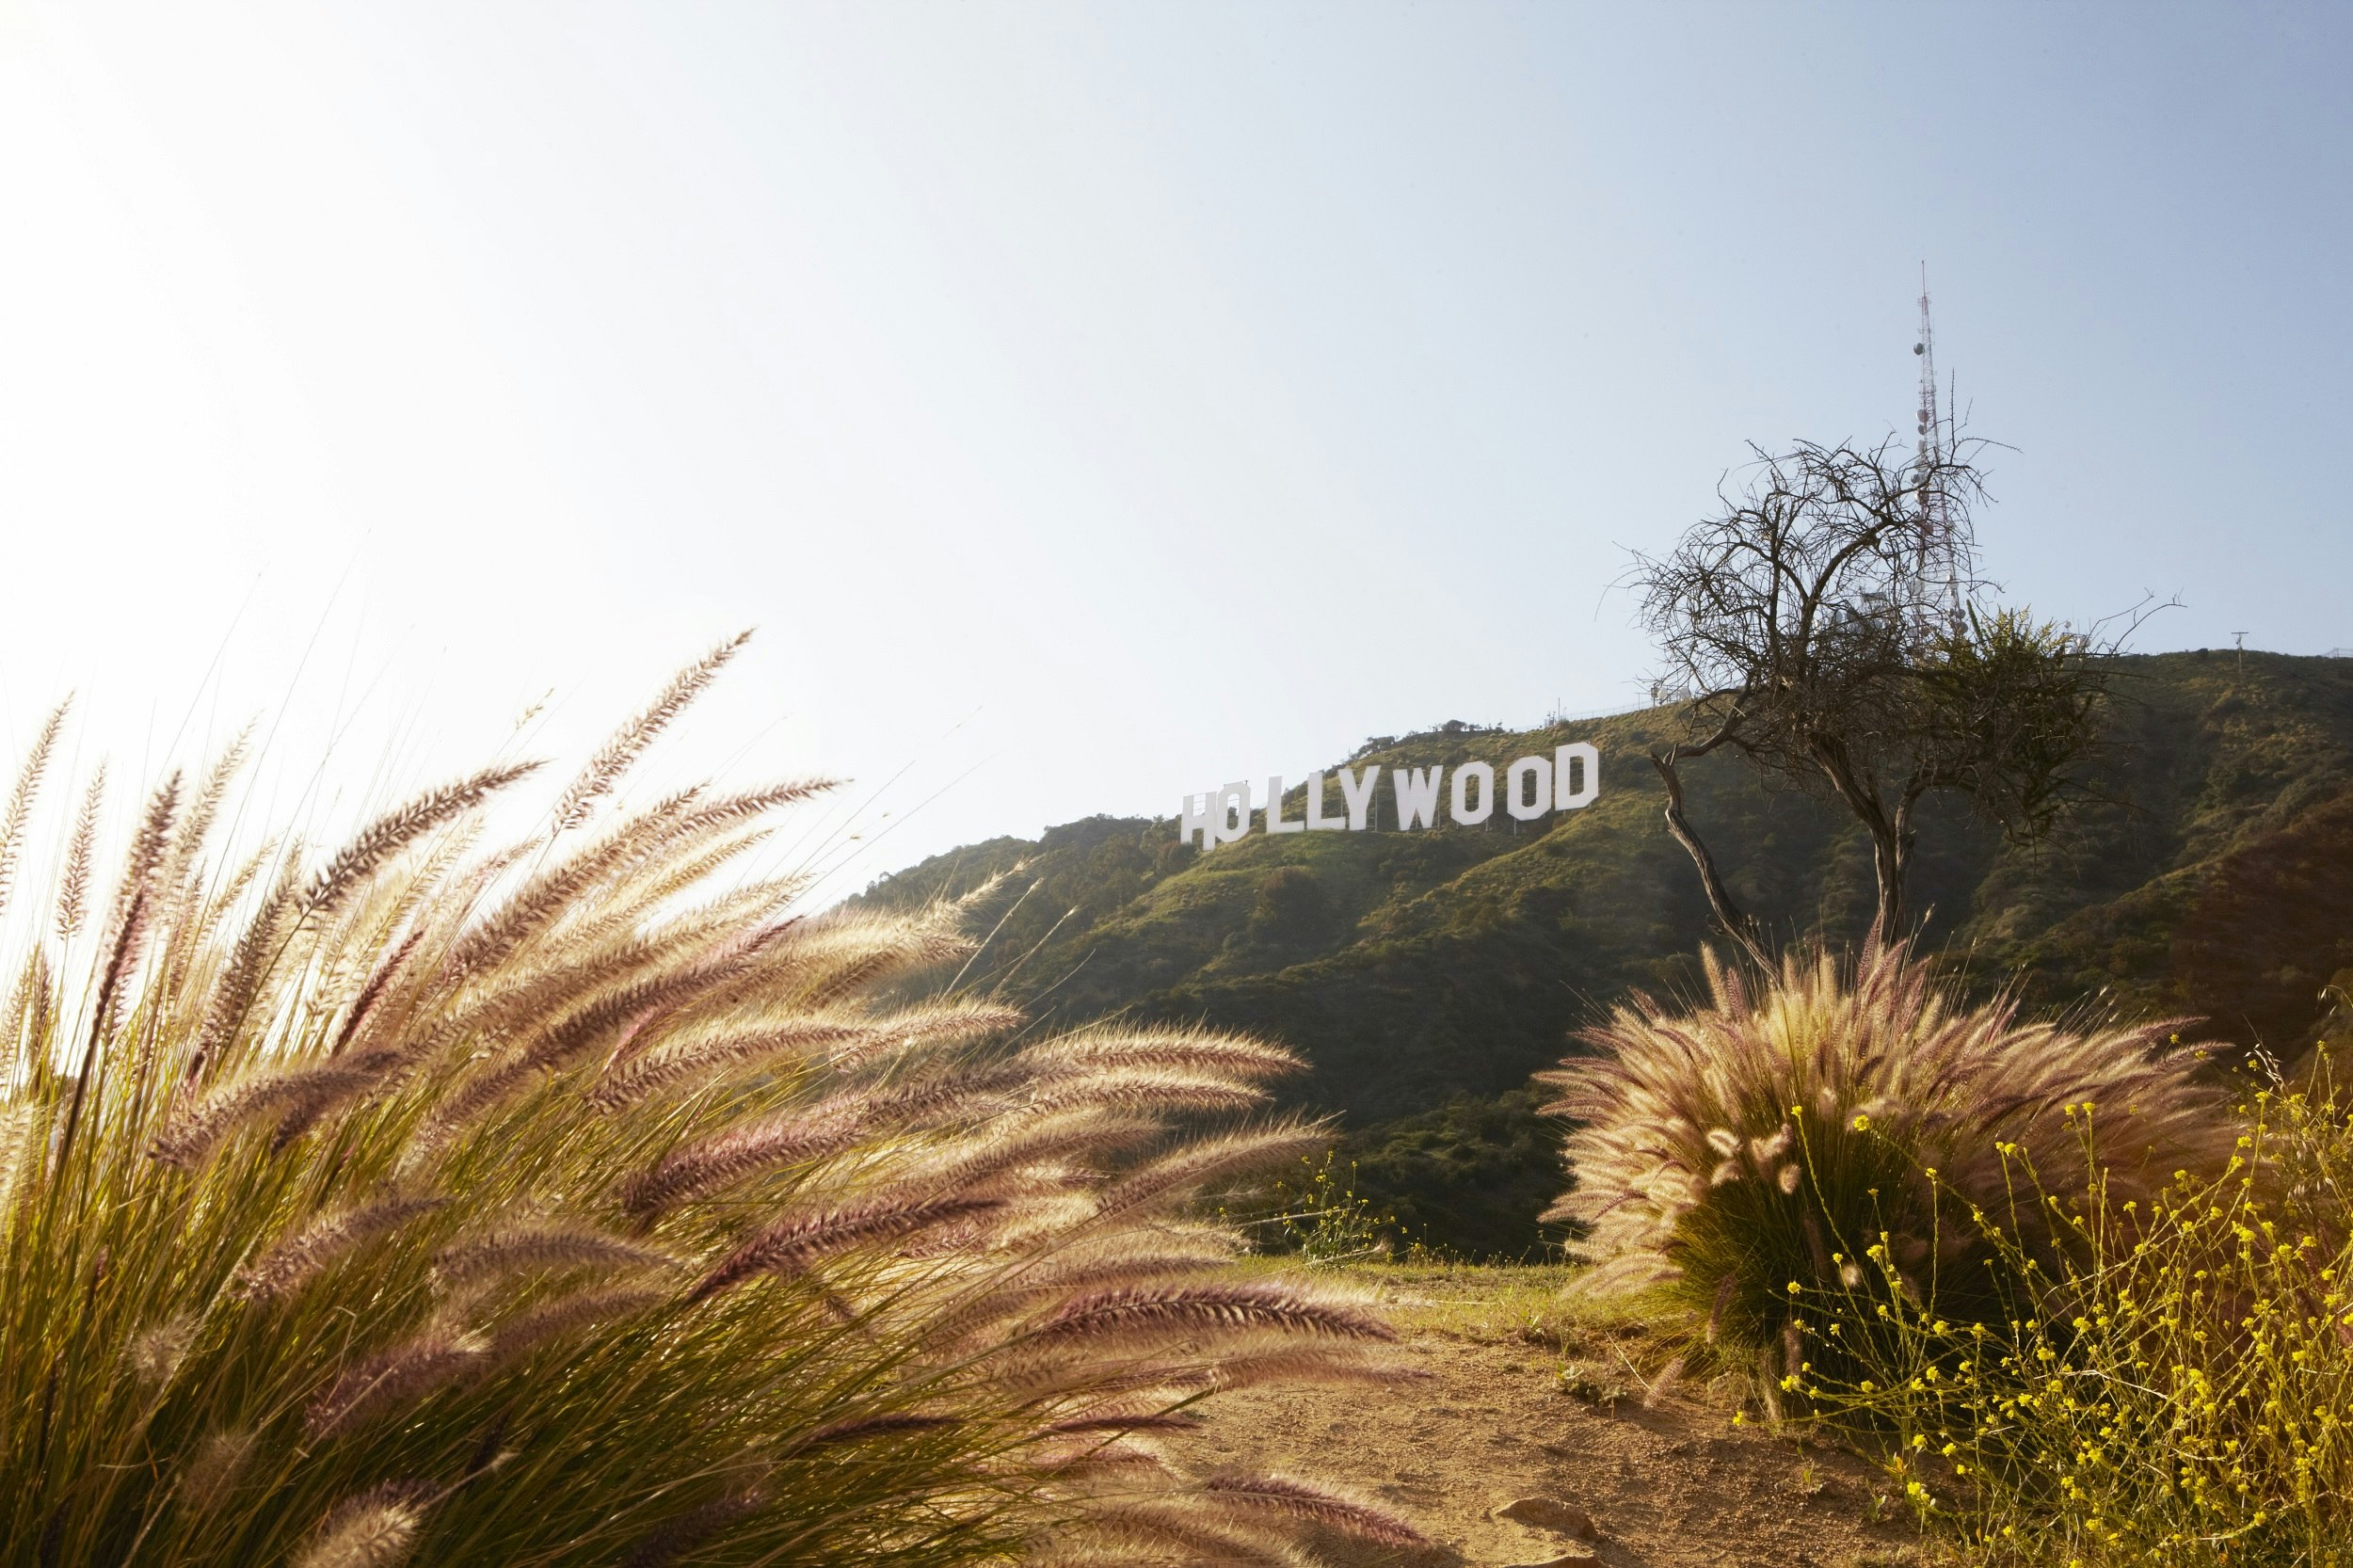 The large white block letters spelling HOLLYWOOD stand out on the distant hills in LA; in the foreground is vegetation.